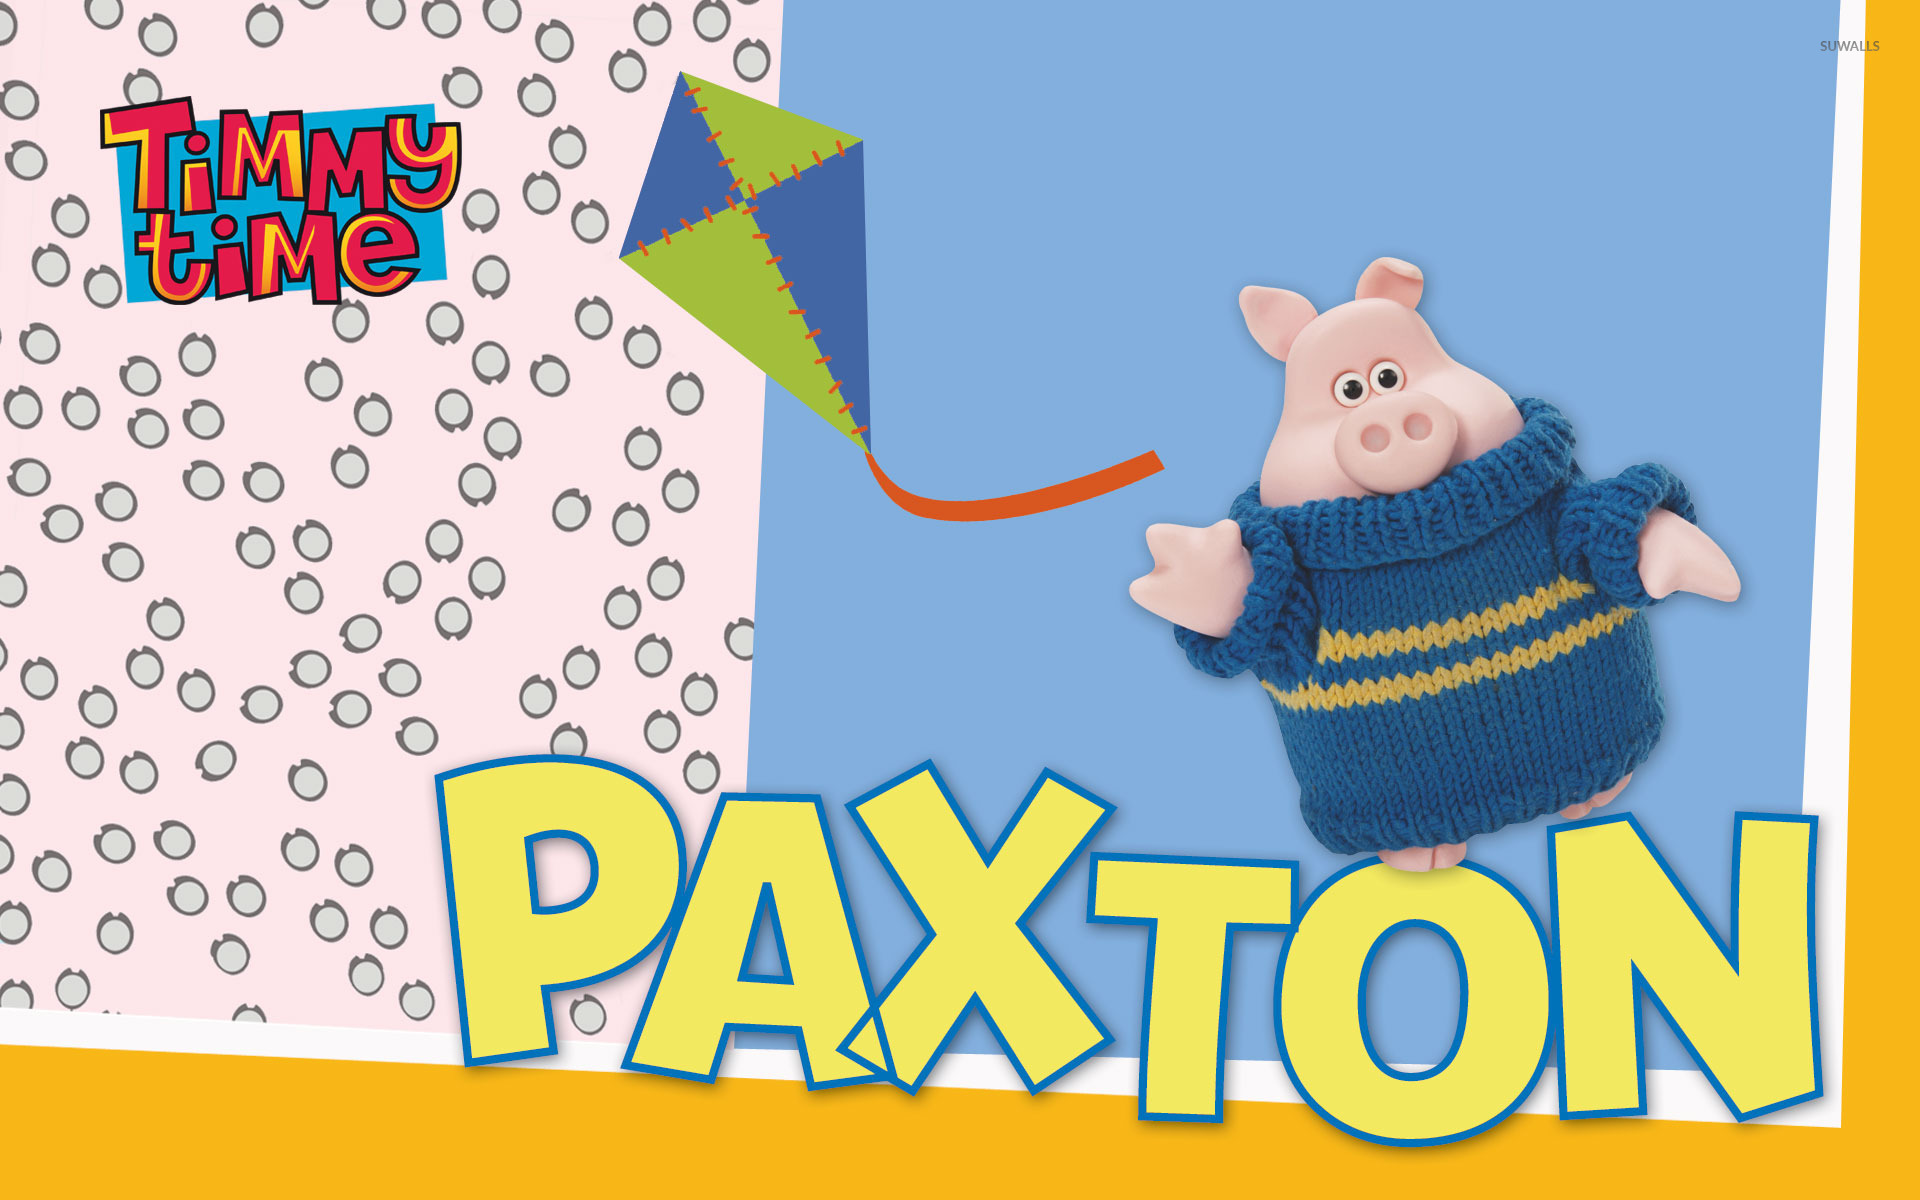 Paxton   Timmy Time wallpaper   Cartoon wallpapers   9893 1680x1050